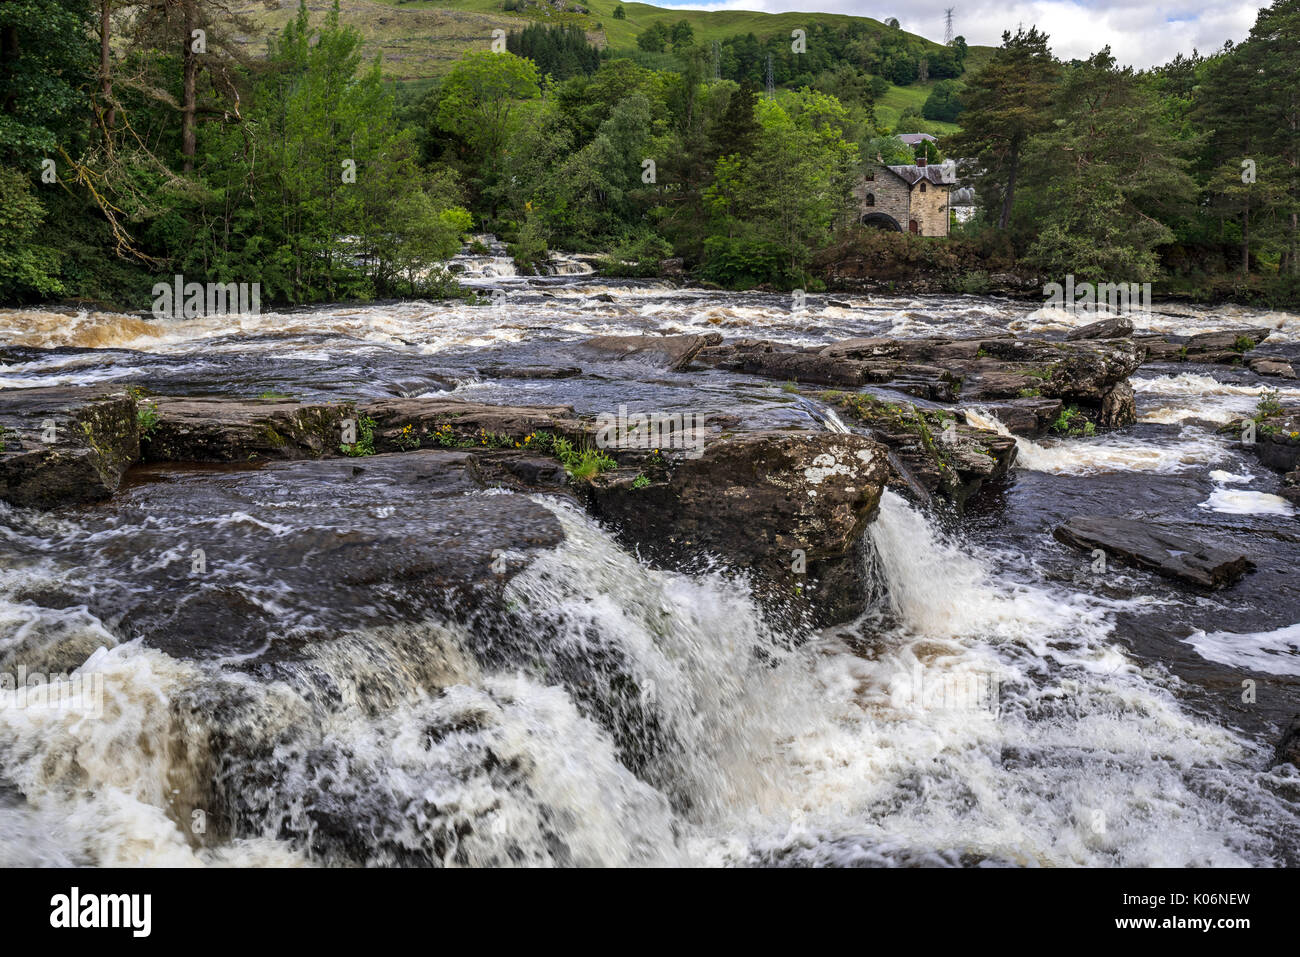 Falls of Dochart in the village Killin and the Old Mill / St Fillan's Mill, Loch Lomond & The Trossachs National Park, Stirling, Scotland, UK Stock Photo